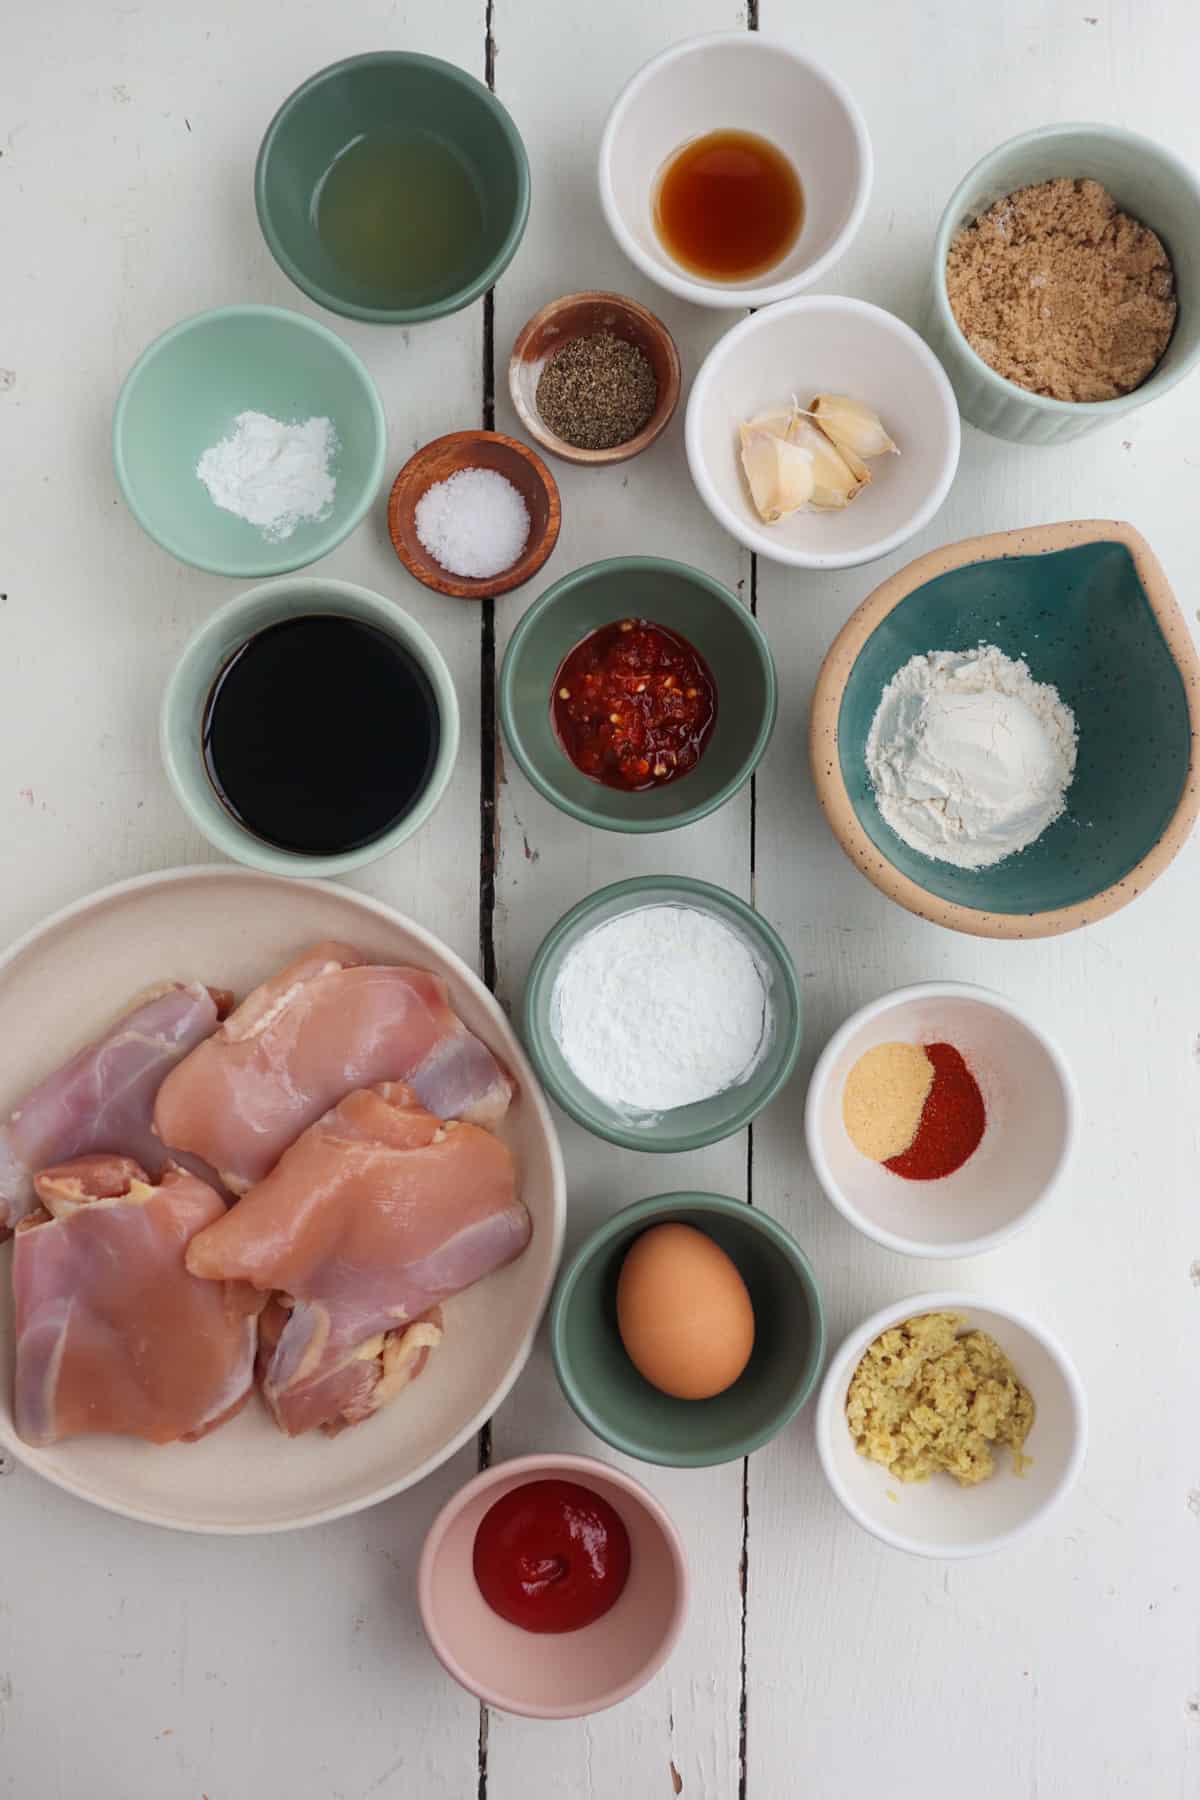 all ingredients for teriyaki chicken bites laid out.